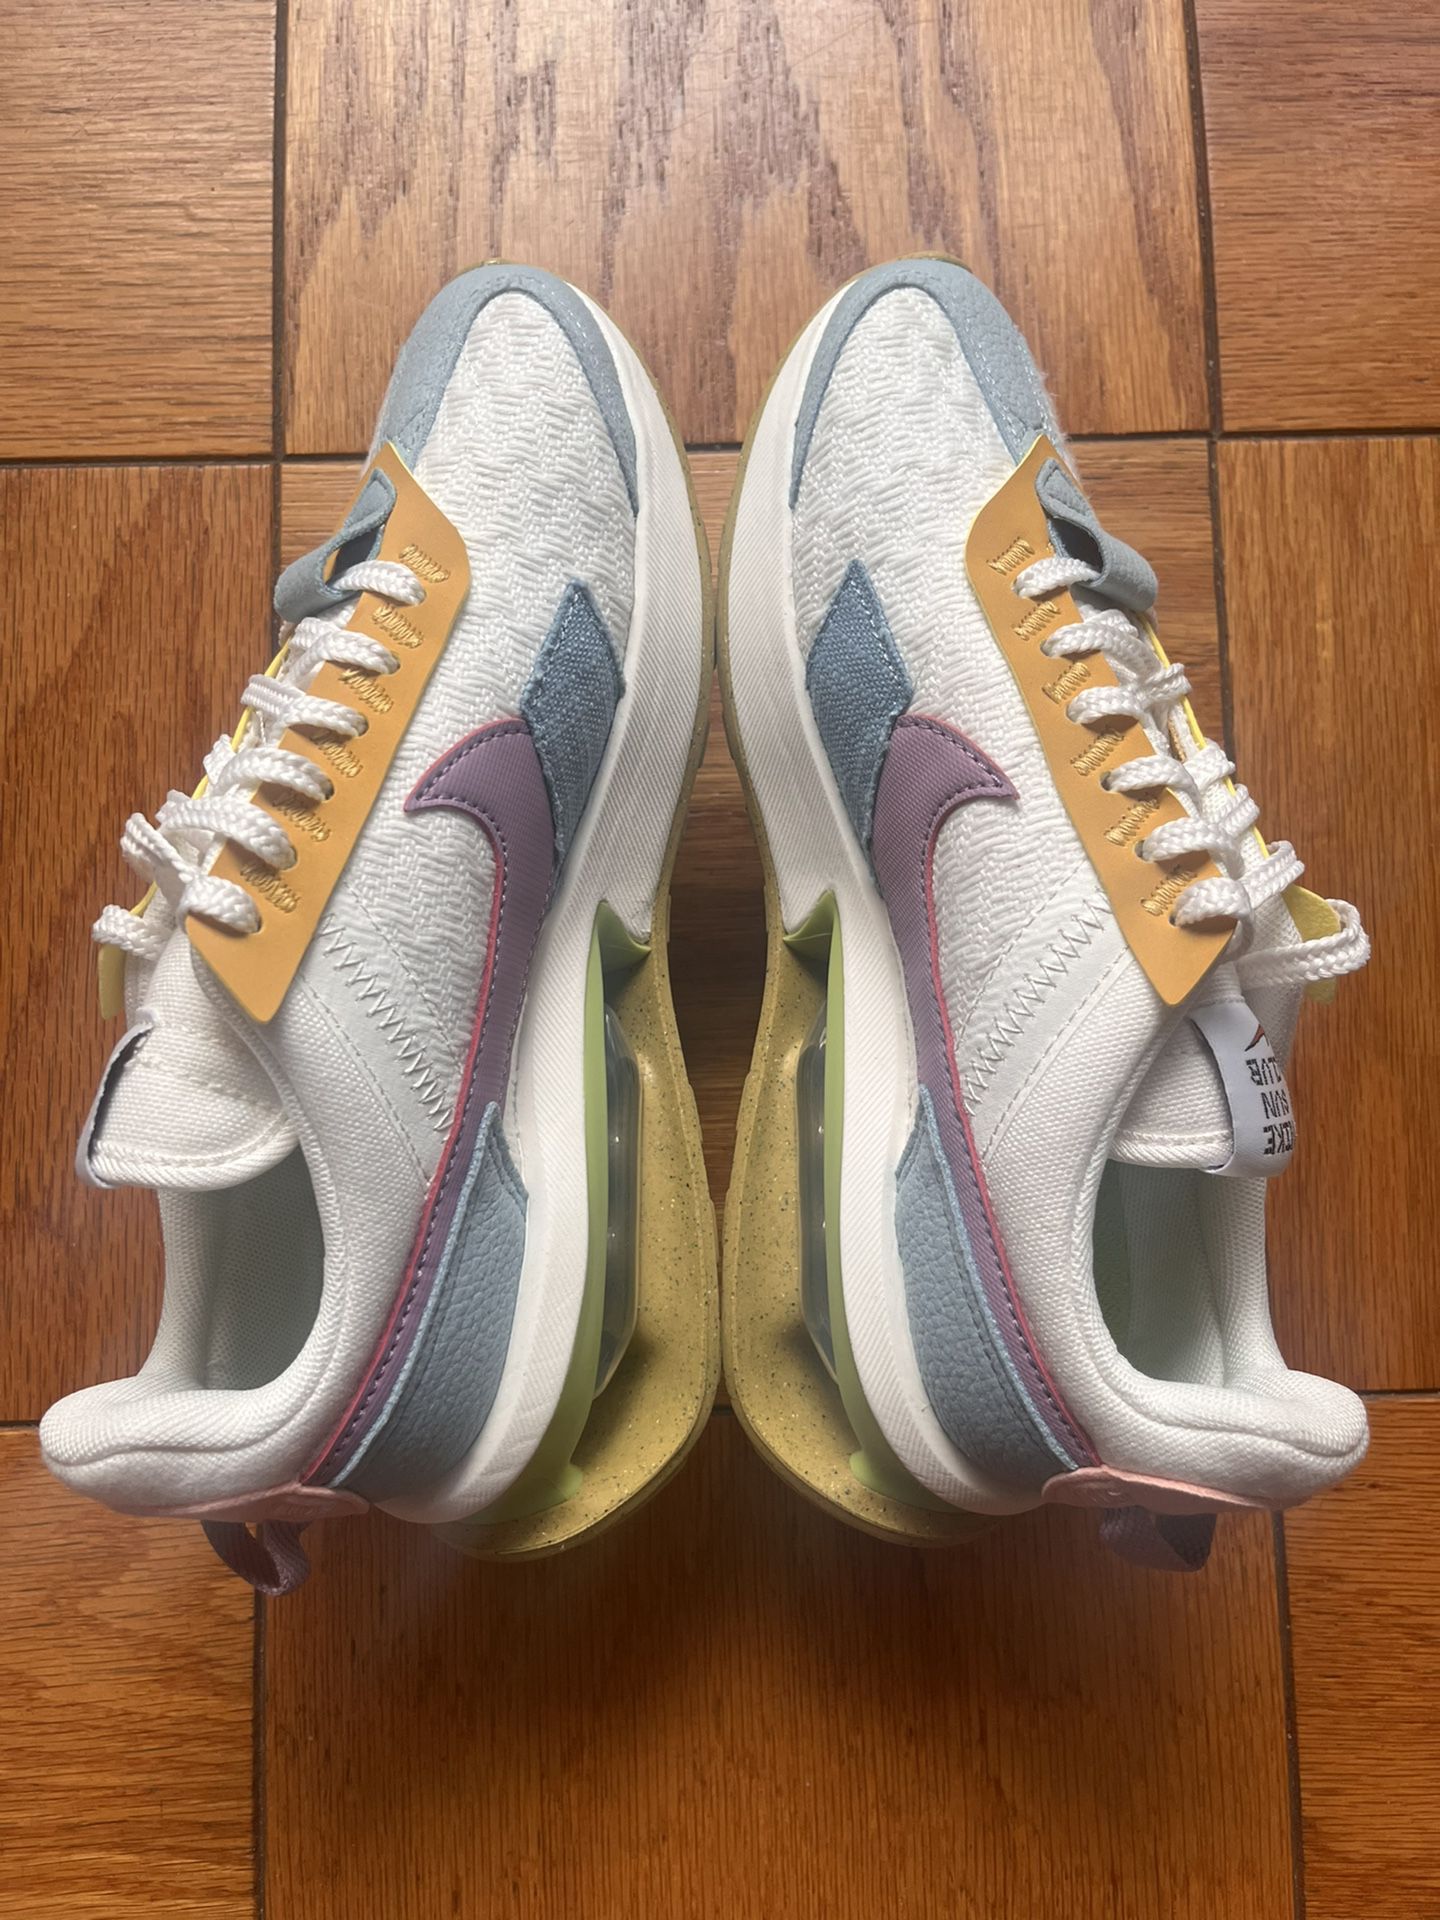 Nike Air Max Pre-Day SE 'Nike Sun Club' Sail Multi DJ9984-100 Womens 12 Men  10.5 for Sale in The Bronx, NY - OfferUp